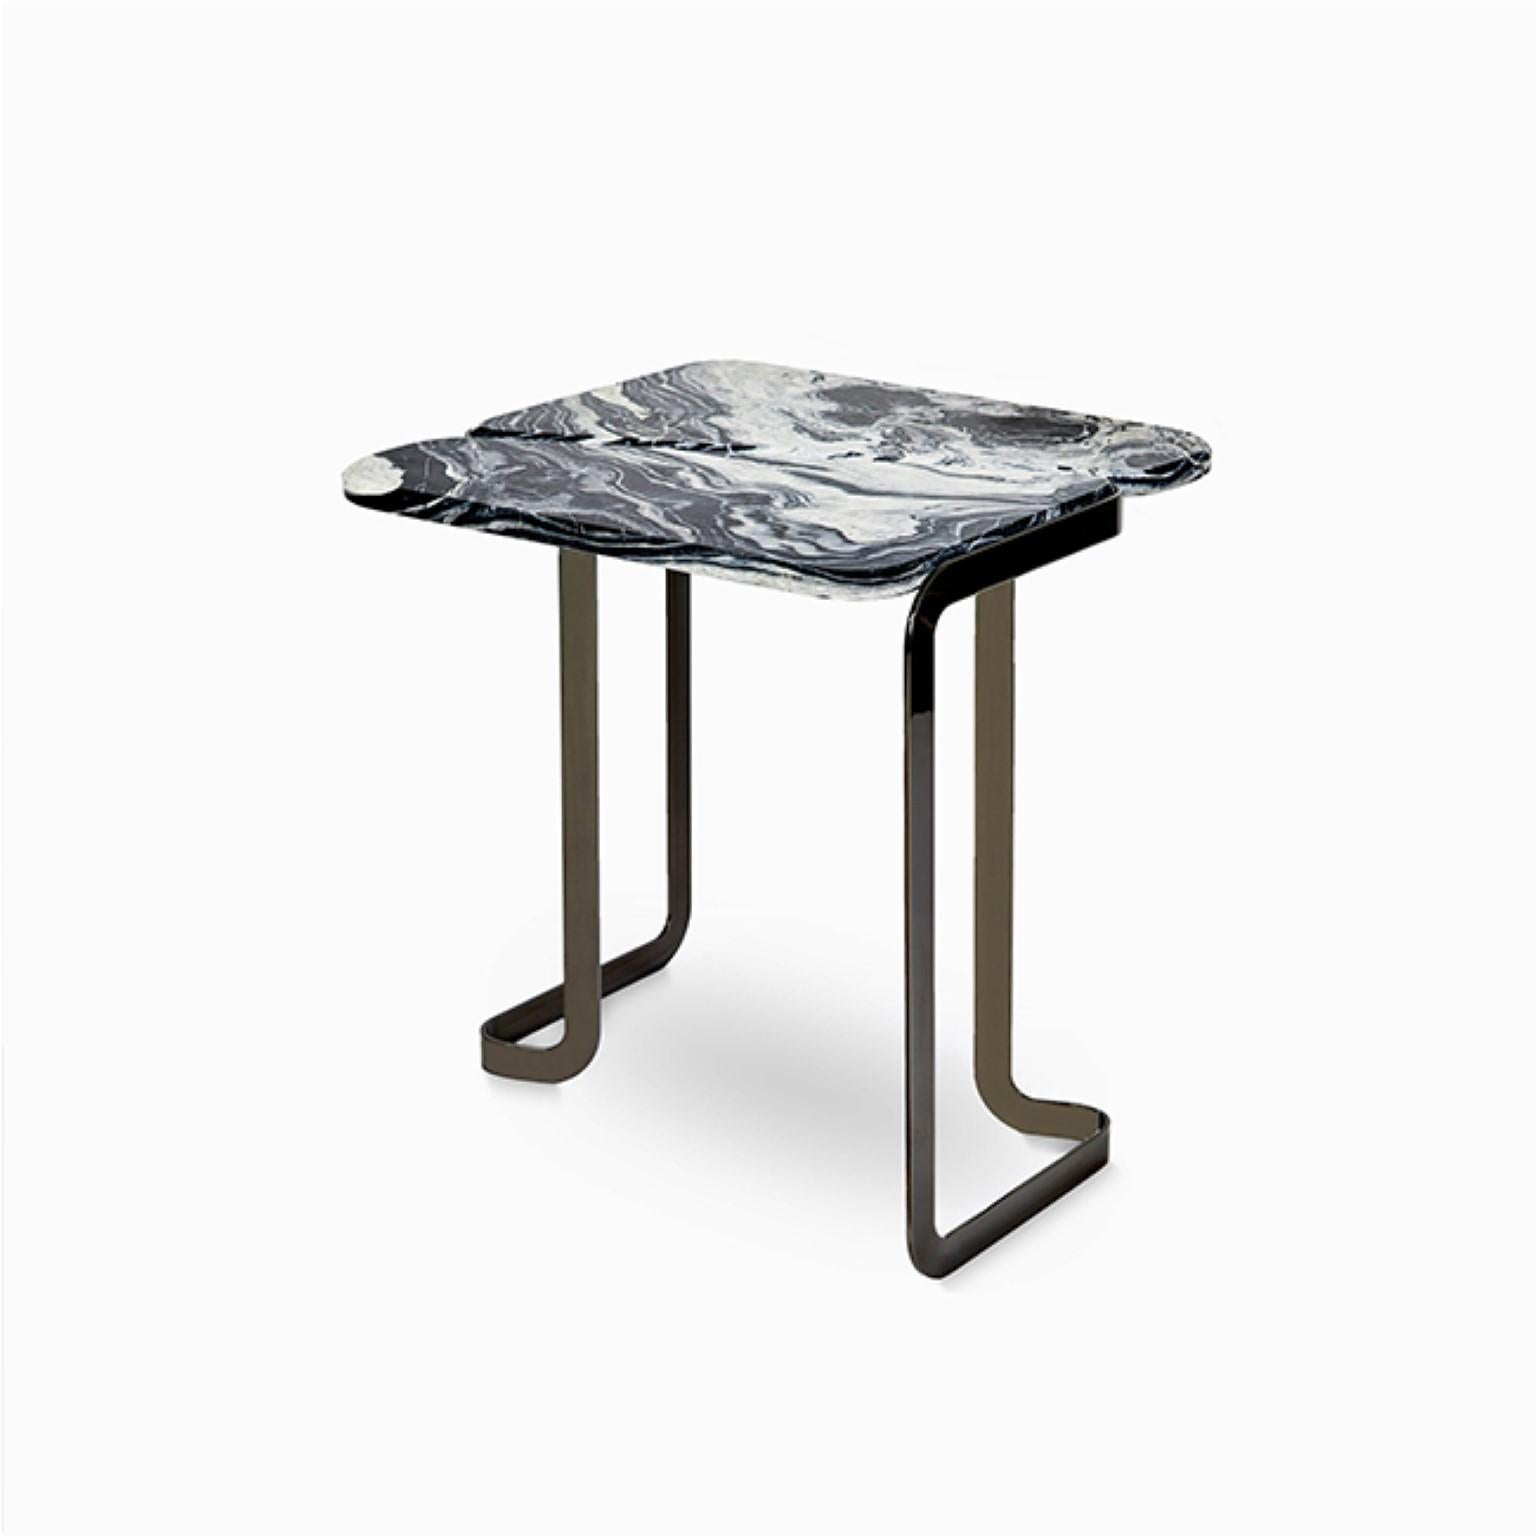 Tigris side table by Marble Balloon
Dimensions: W 50 x D 49.5 x H 52.5 cm
Materials: Legs made of titanium coating on stainless metal and a
marble top.

Named after the great Tigris River

Marble balloon is an interior design and high-end